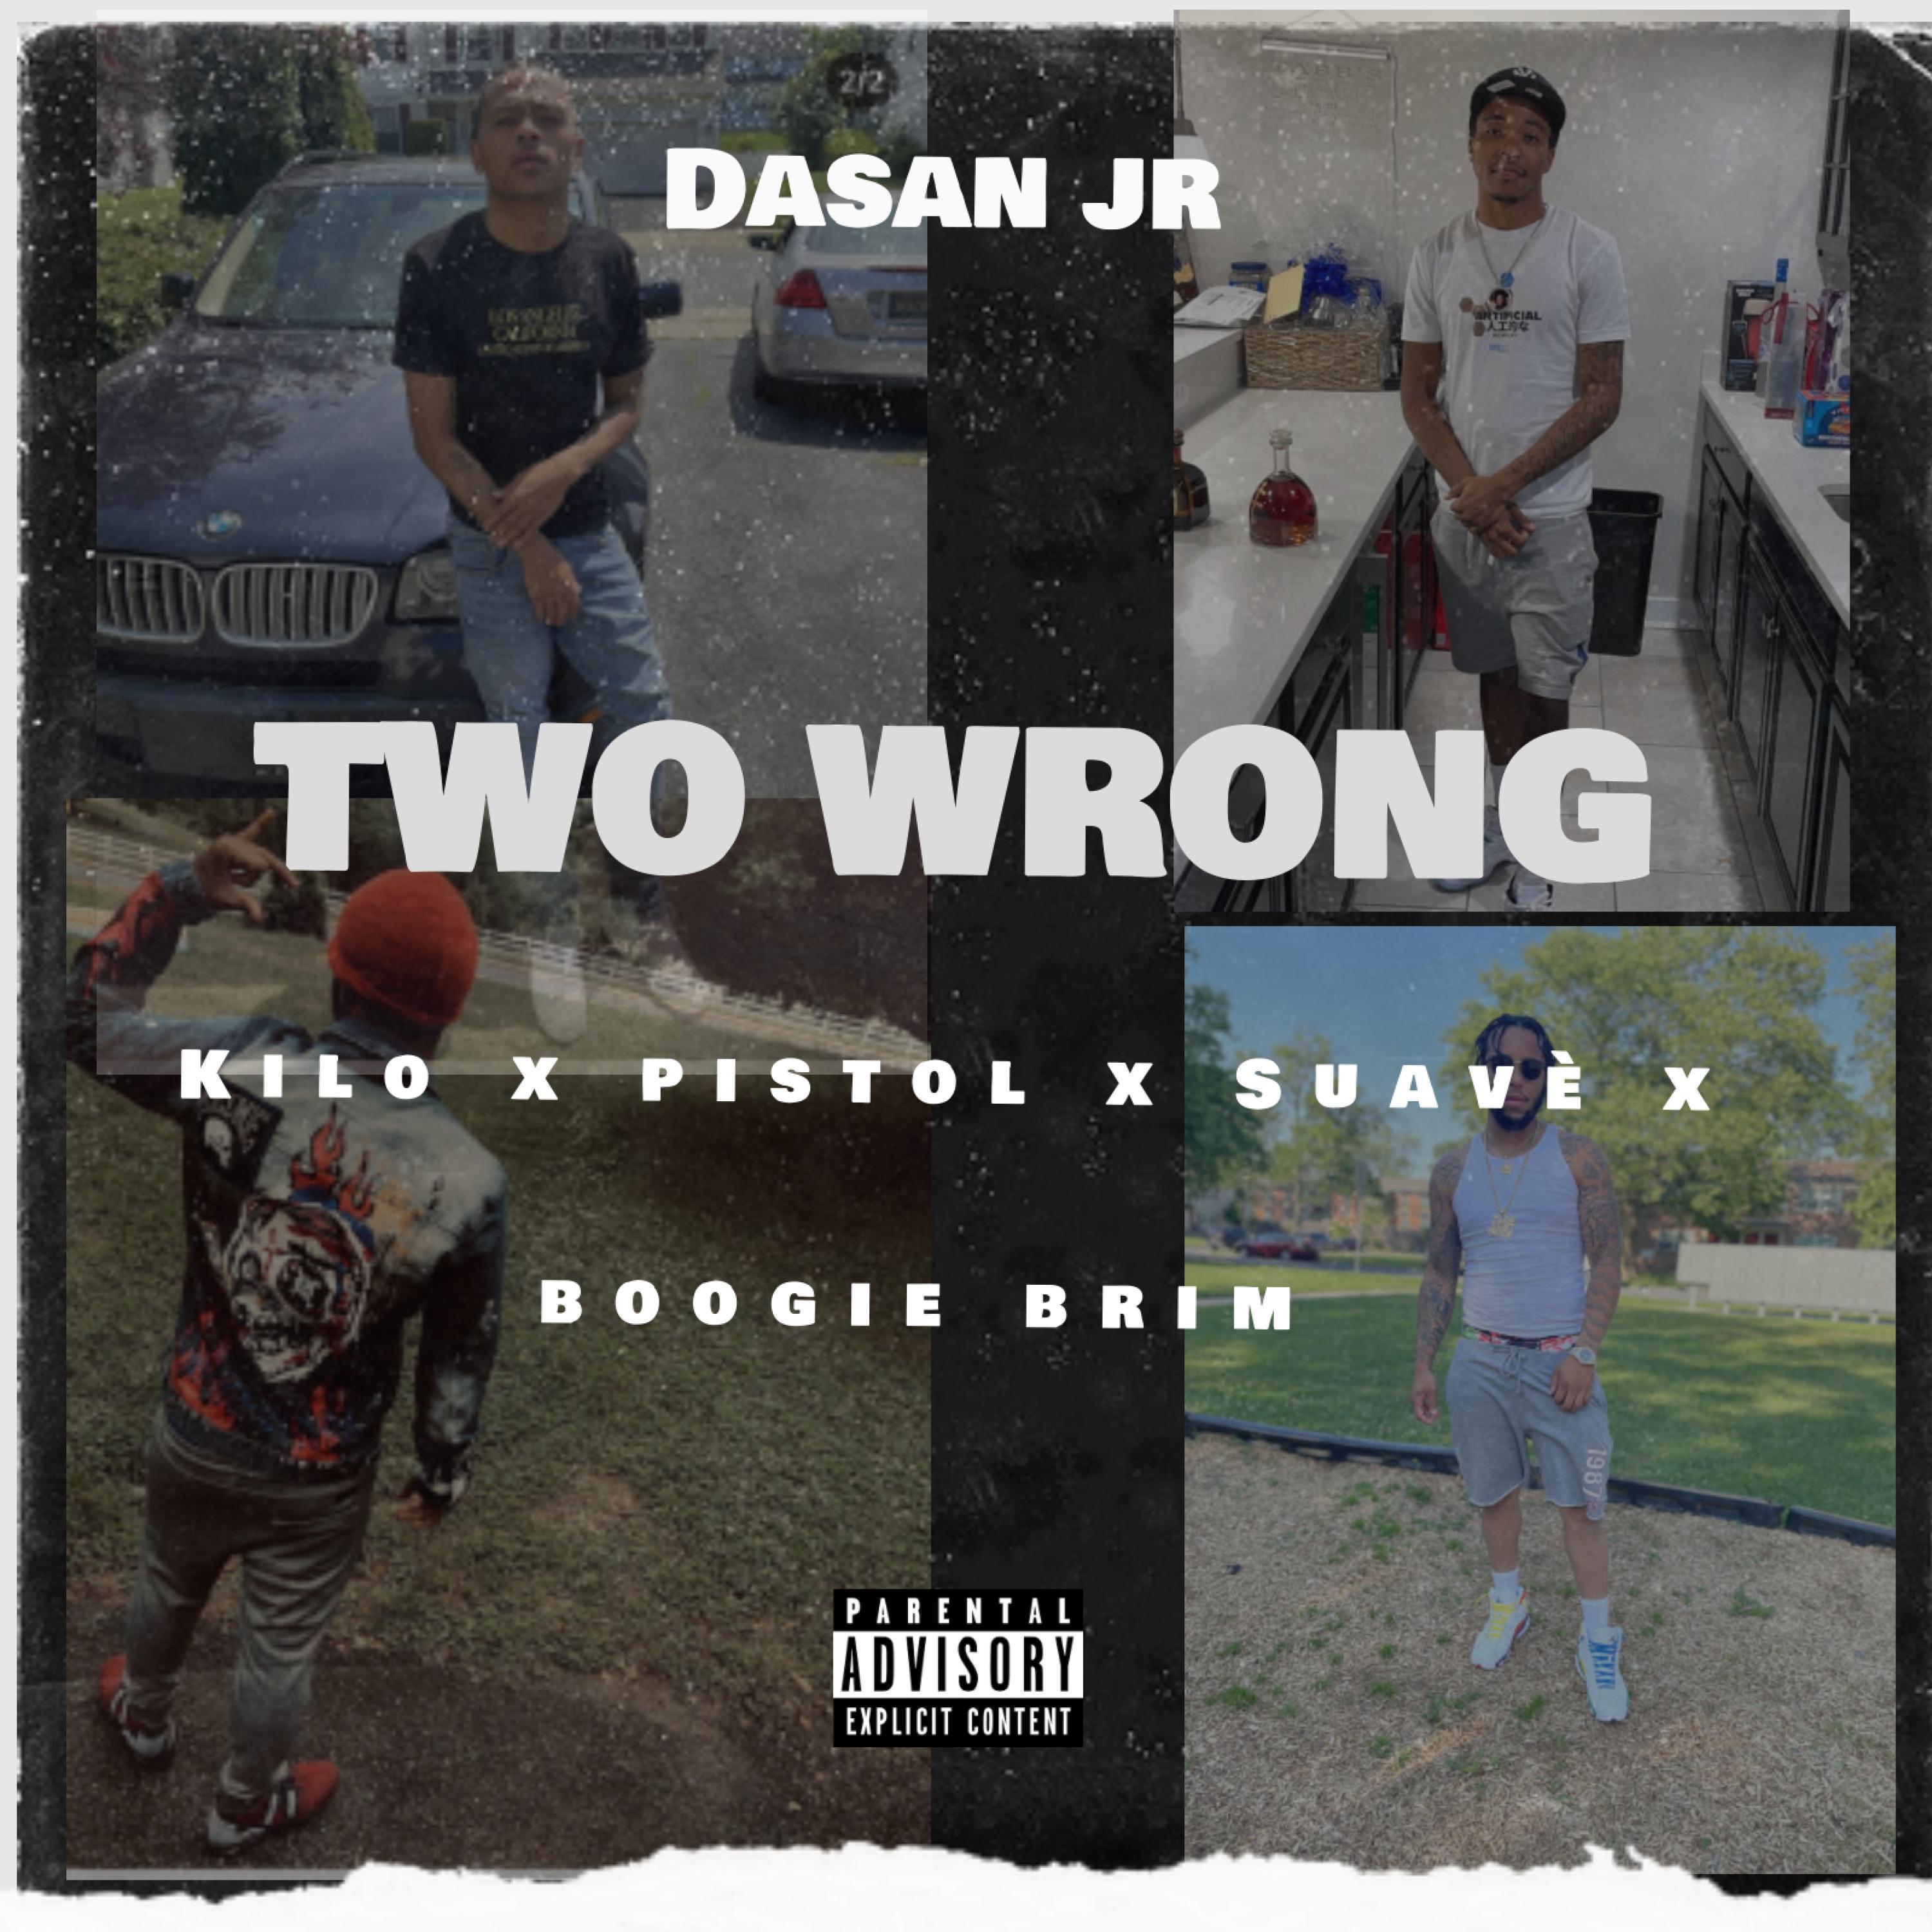 DasanJr - TWO WRONG (feat. PISTOL, SUAVE & BOOGIE BRIM)